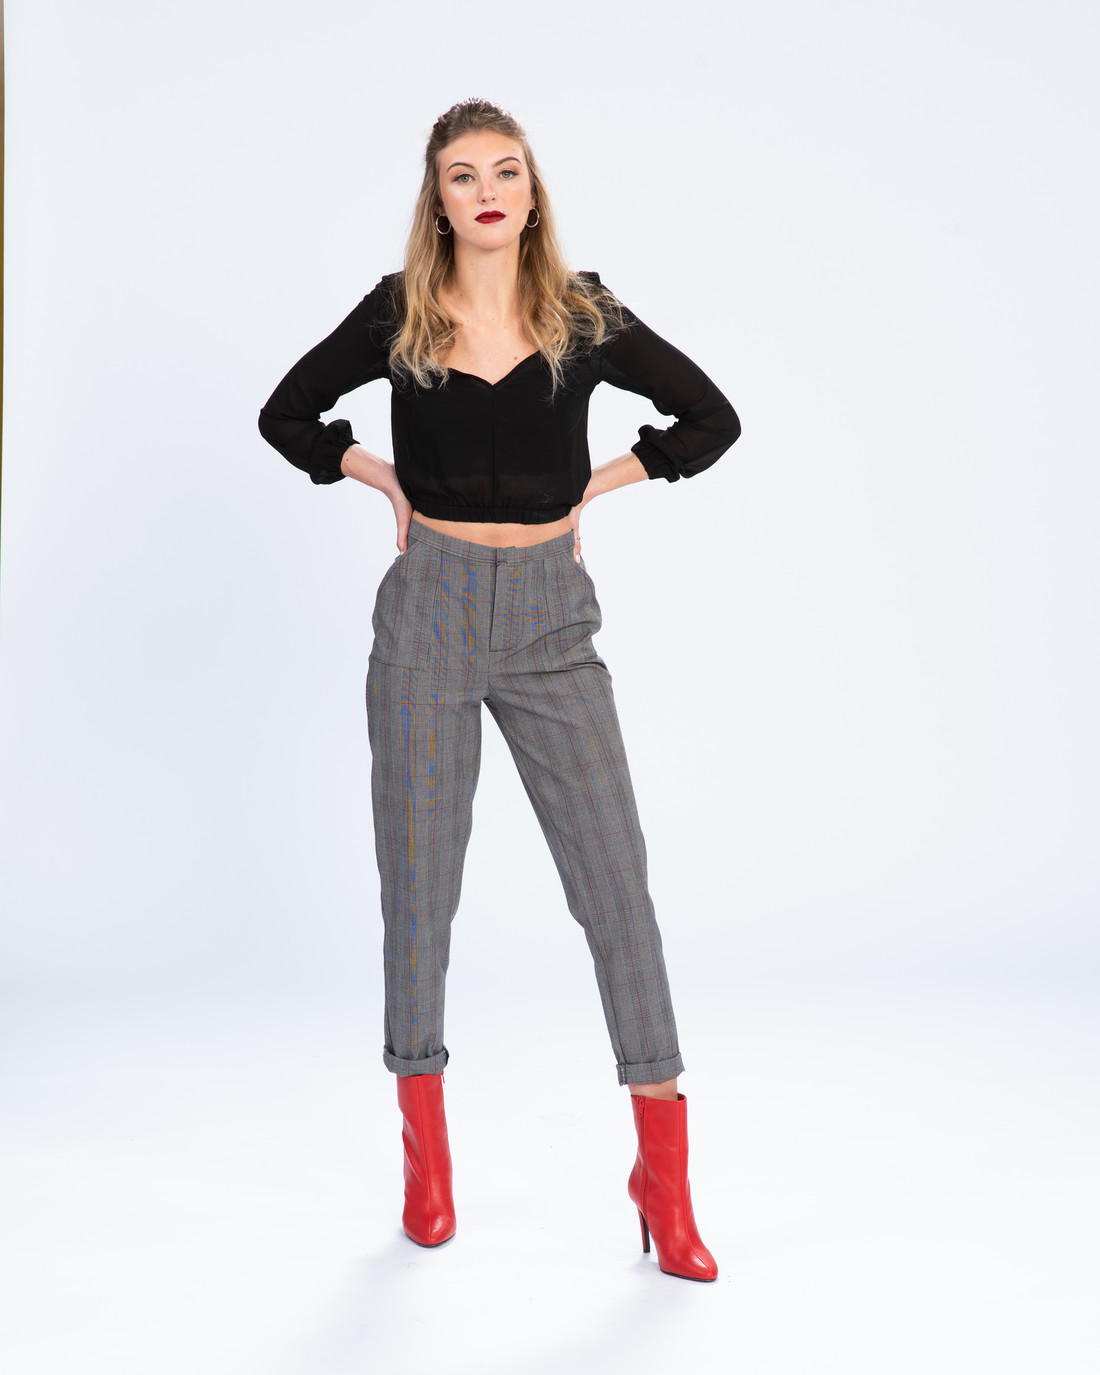 Woman in black top, grey cropped pants, red boots